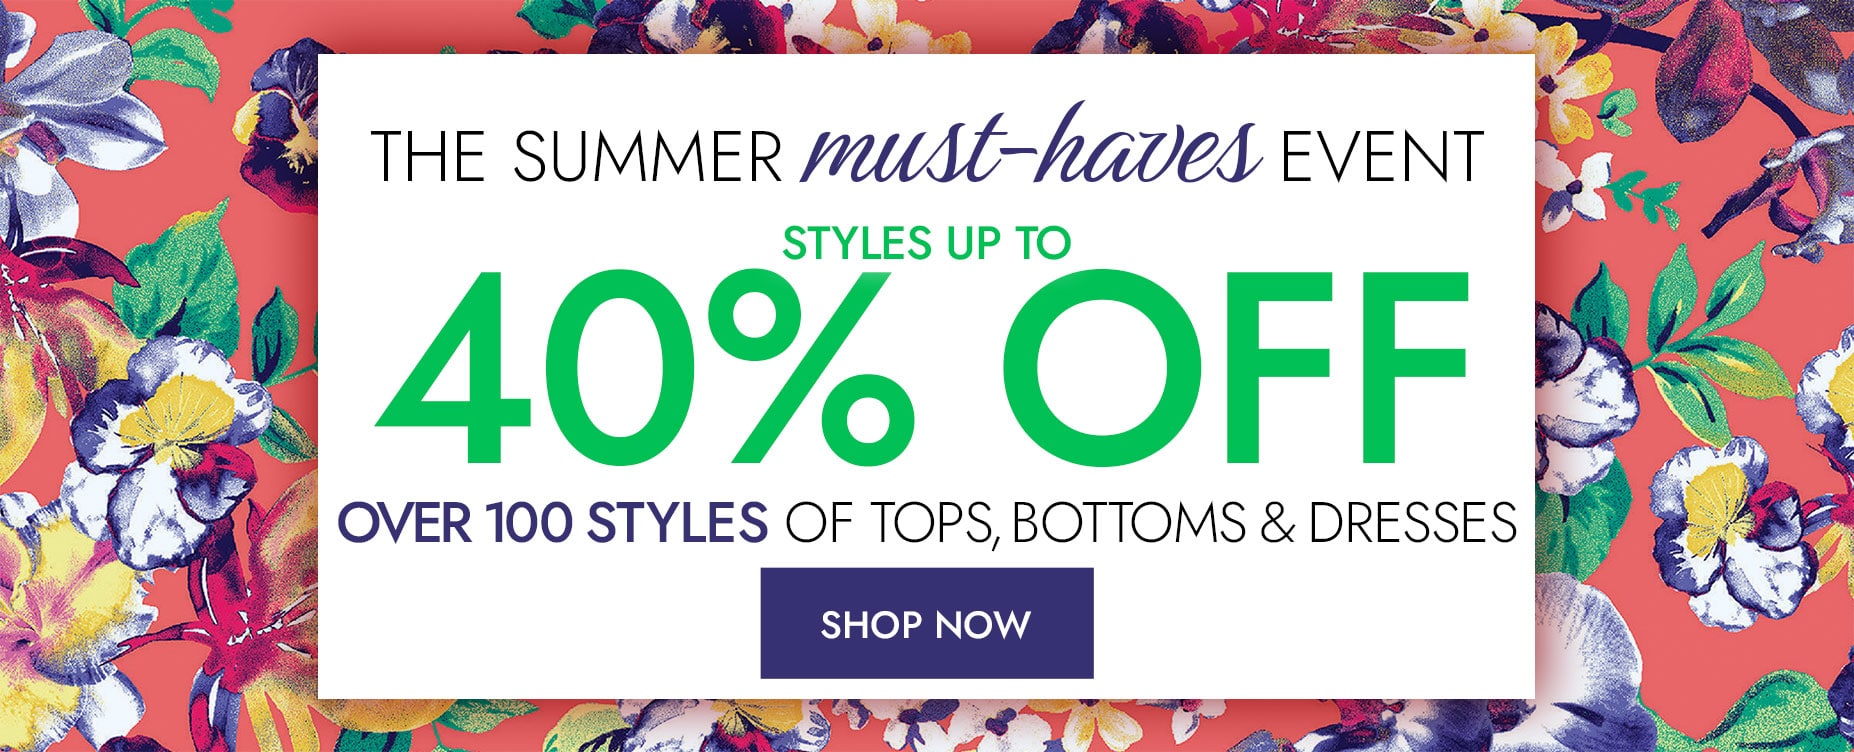 The Summer must-haves event styles up to 40% Off shop now